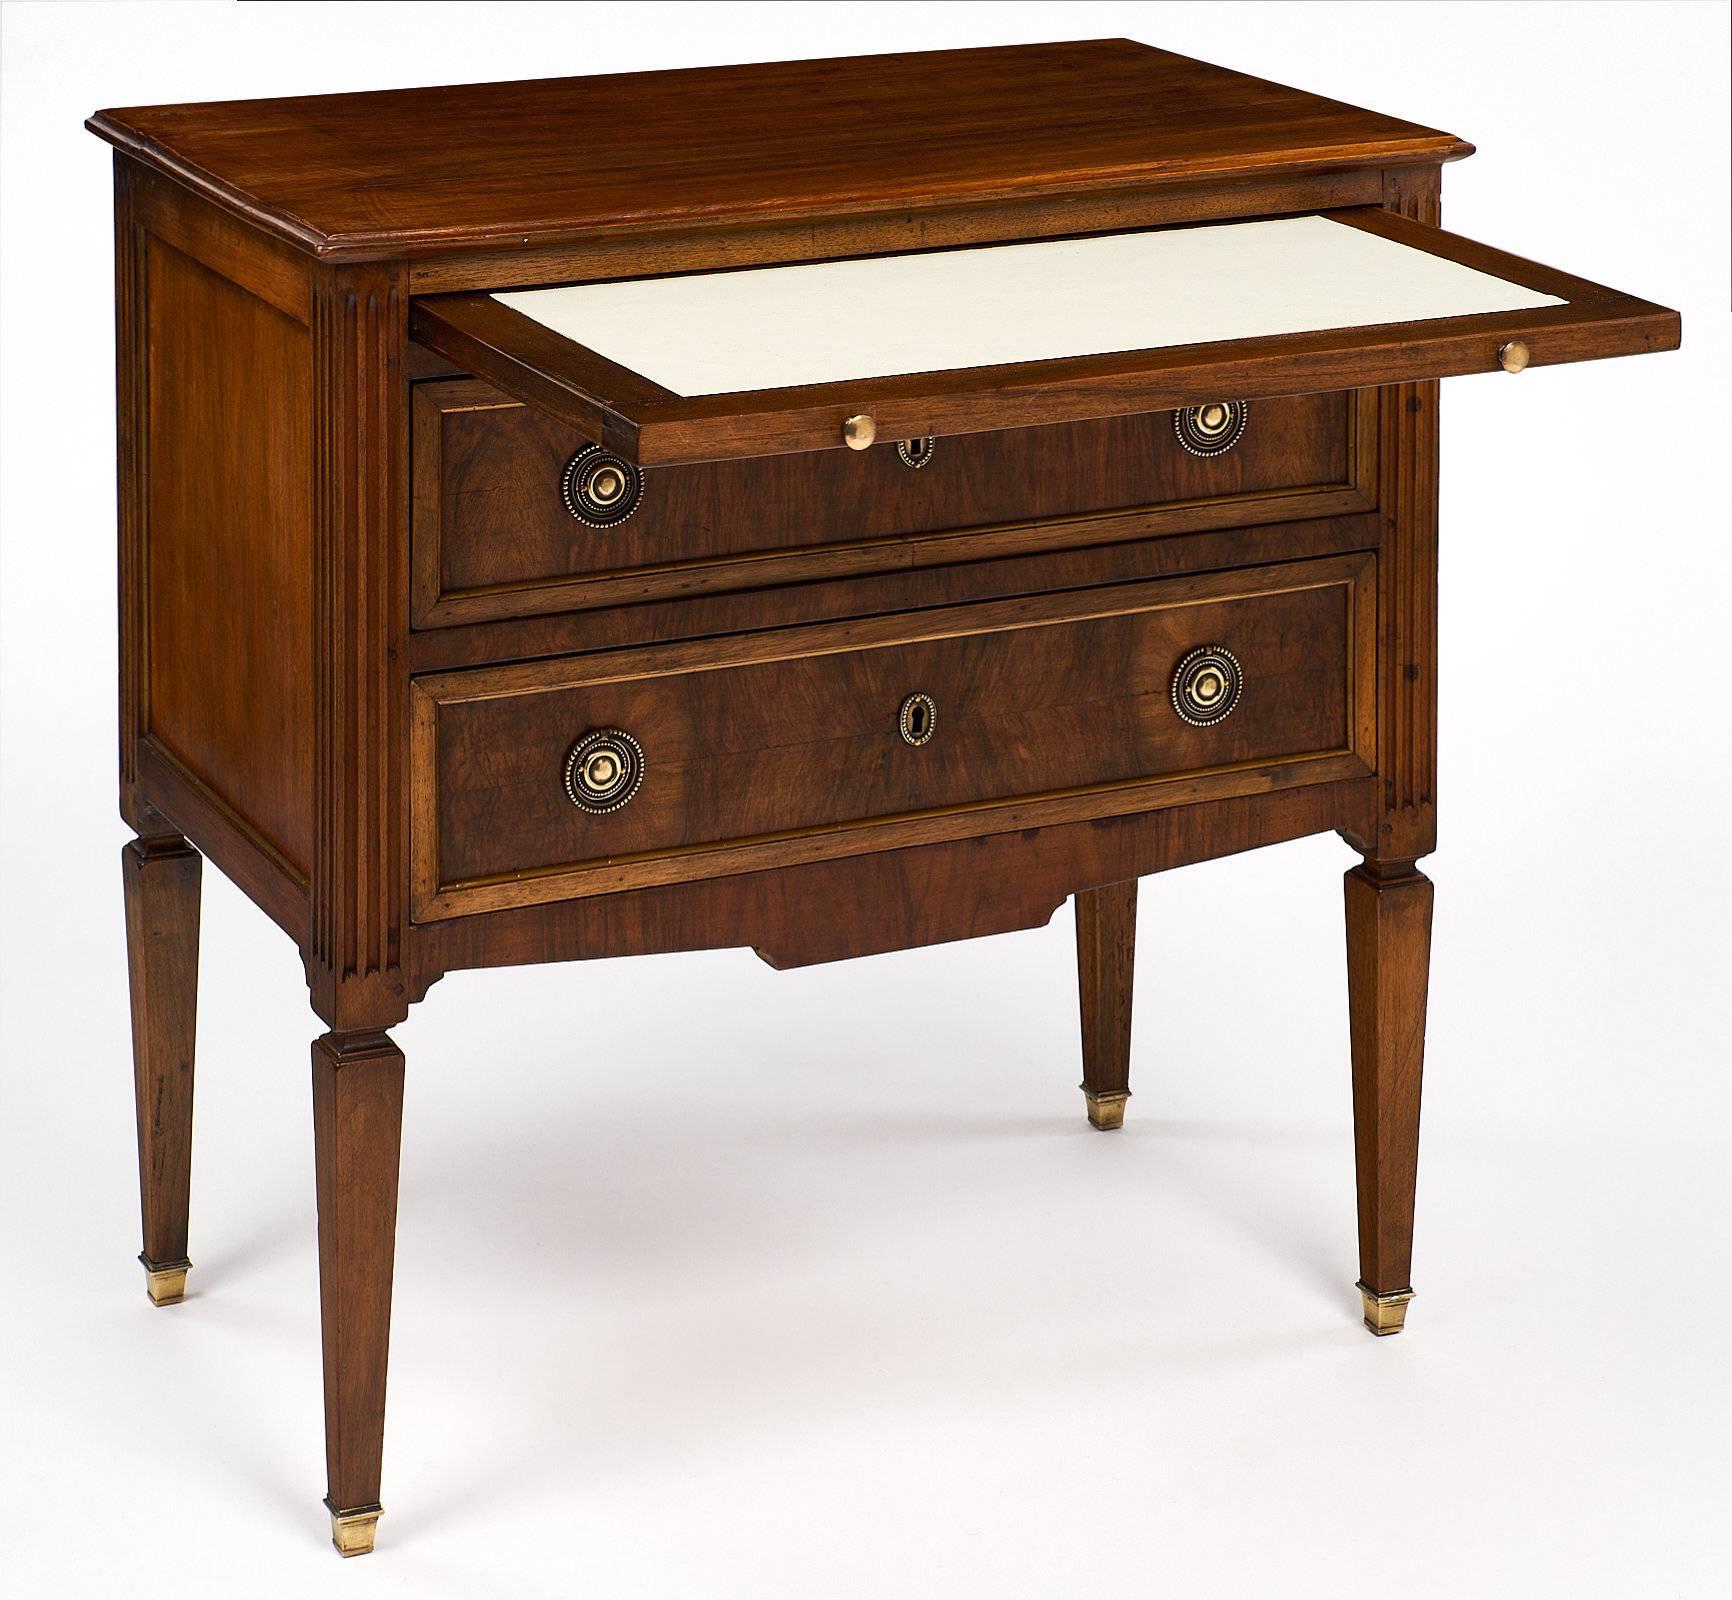 This elegant Louis XVI style chest has a nice plank top of figured walnut and finely cast bronze hardware. This piece features a wonderful pull-out leaf with an ivory colored leather writing surface. The pull-out leaf is 27.5” wide and 13.75” deep.